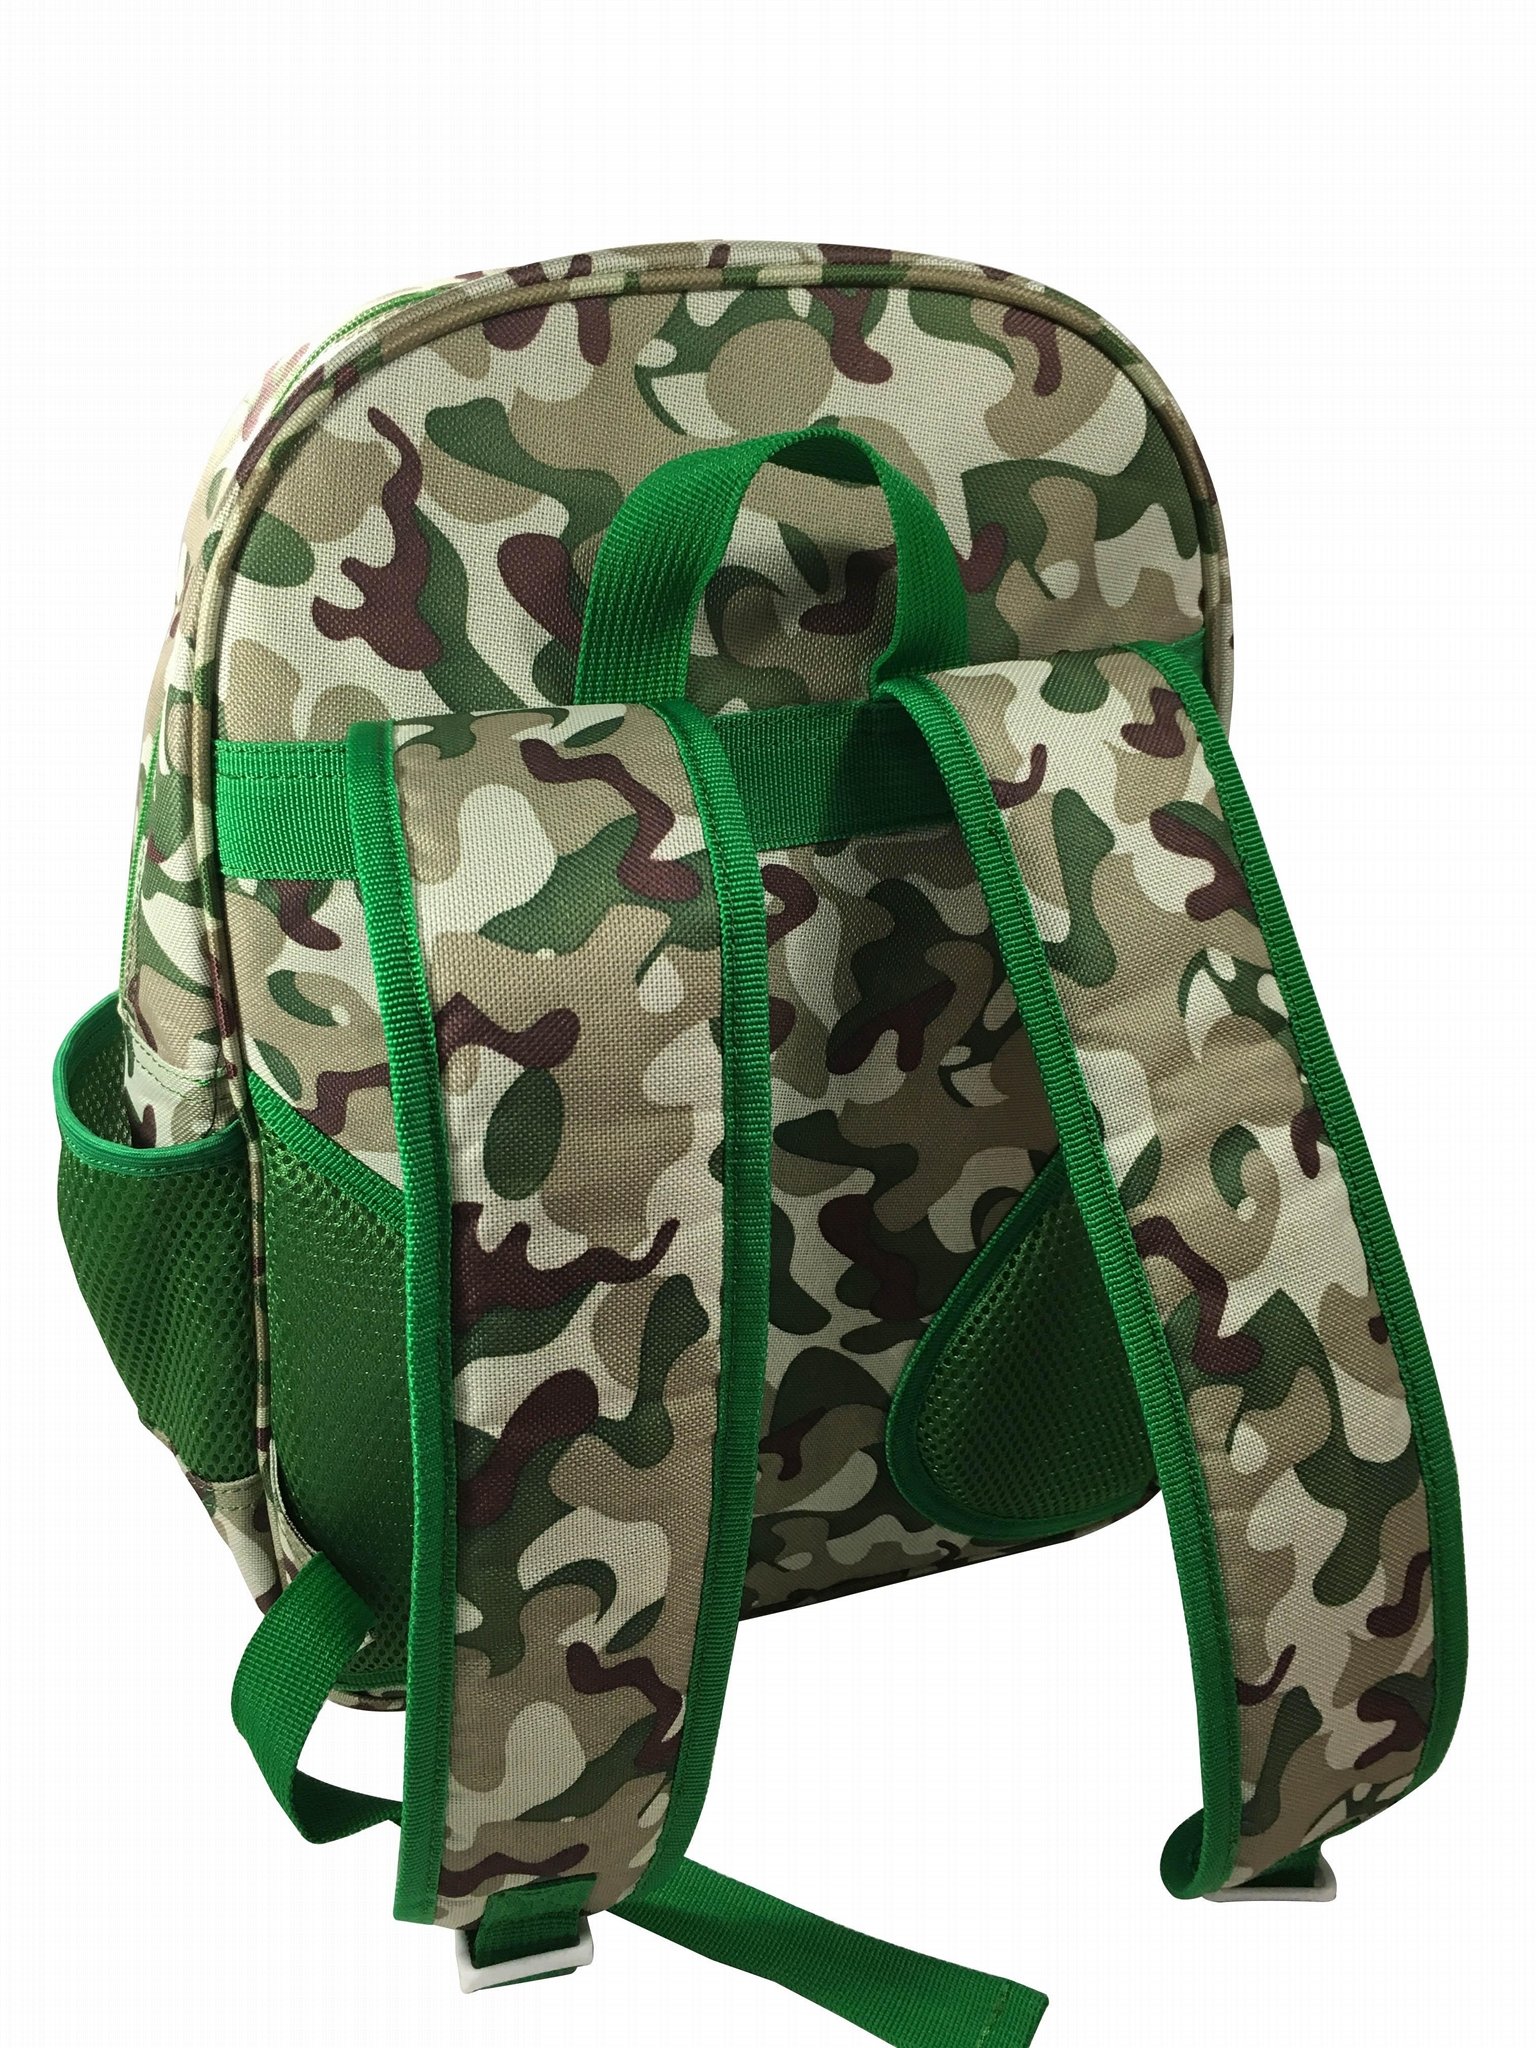 Customization of new school bags and Backpacker factory 4